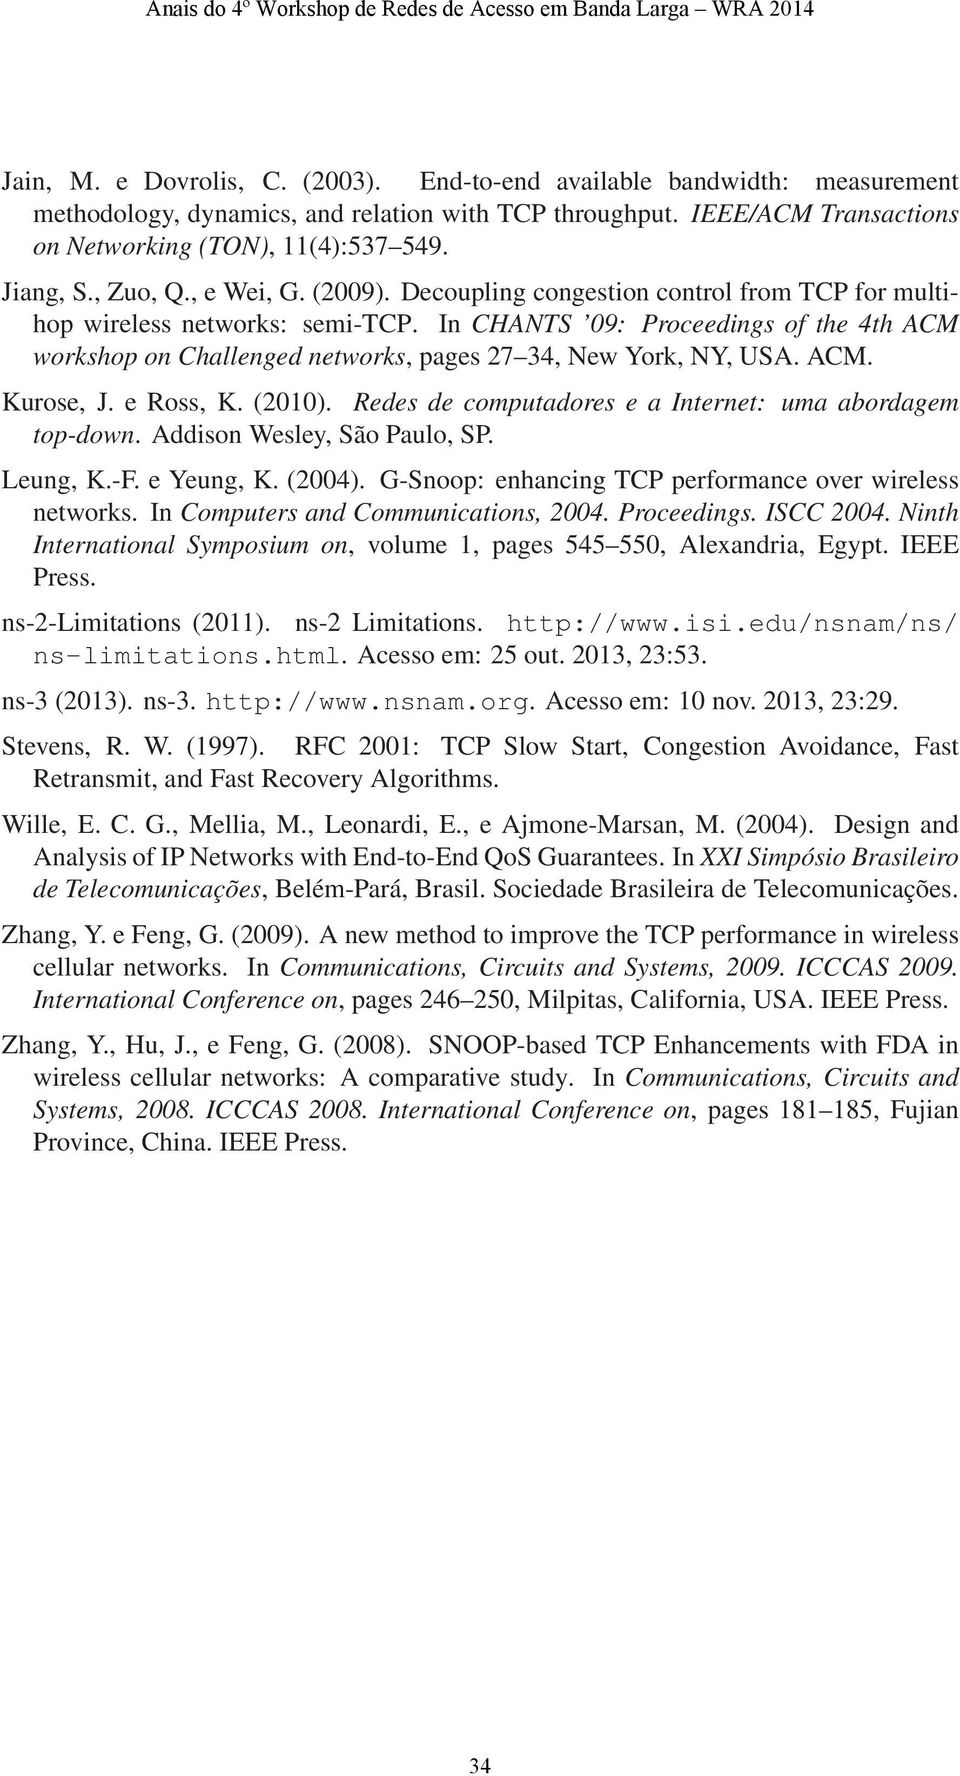 In CHANTS 9: Proceedings of the 4th ACM workshop on Challenged networks, pages 27 34, New York, NY, USA. ACM. Kurose, J. e Ross, K. (21). Redes de computadores e a Internet: uma abordagem top-down.